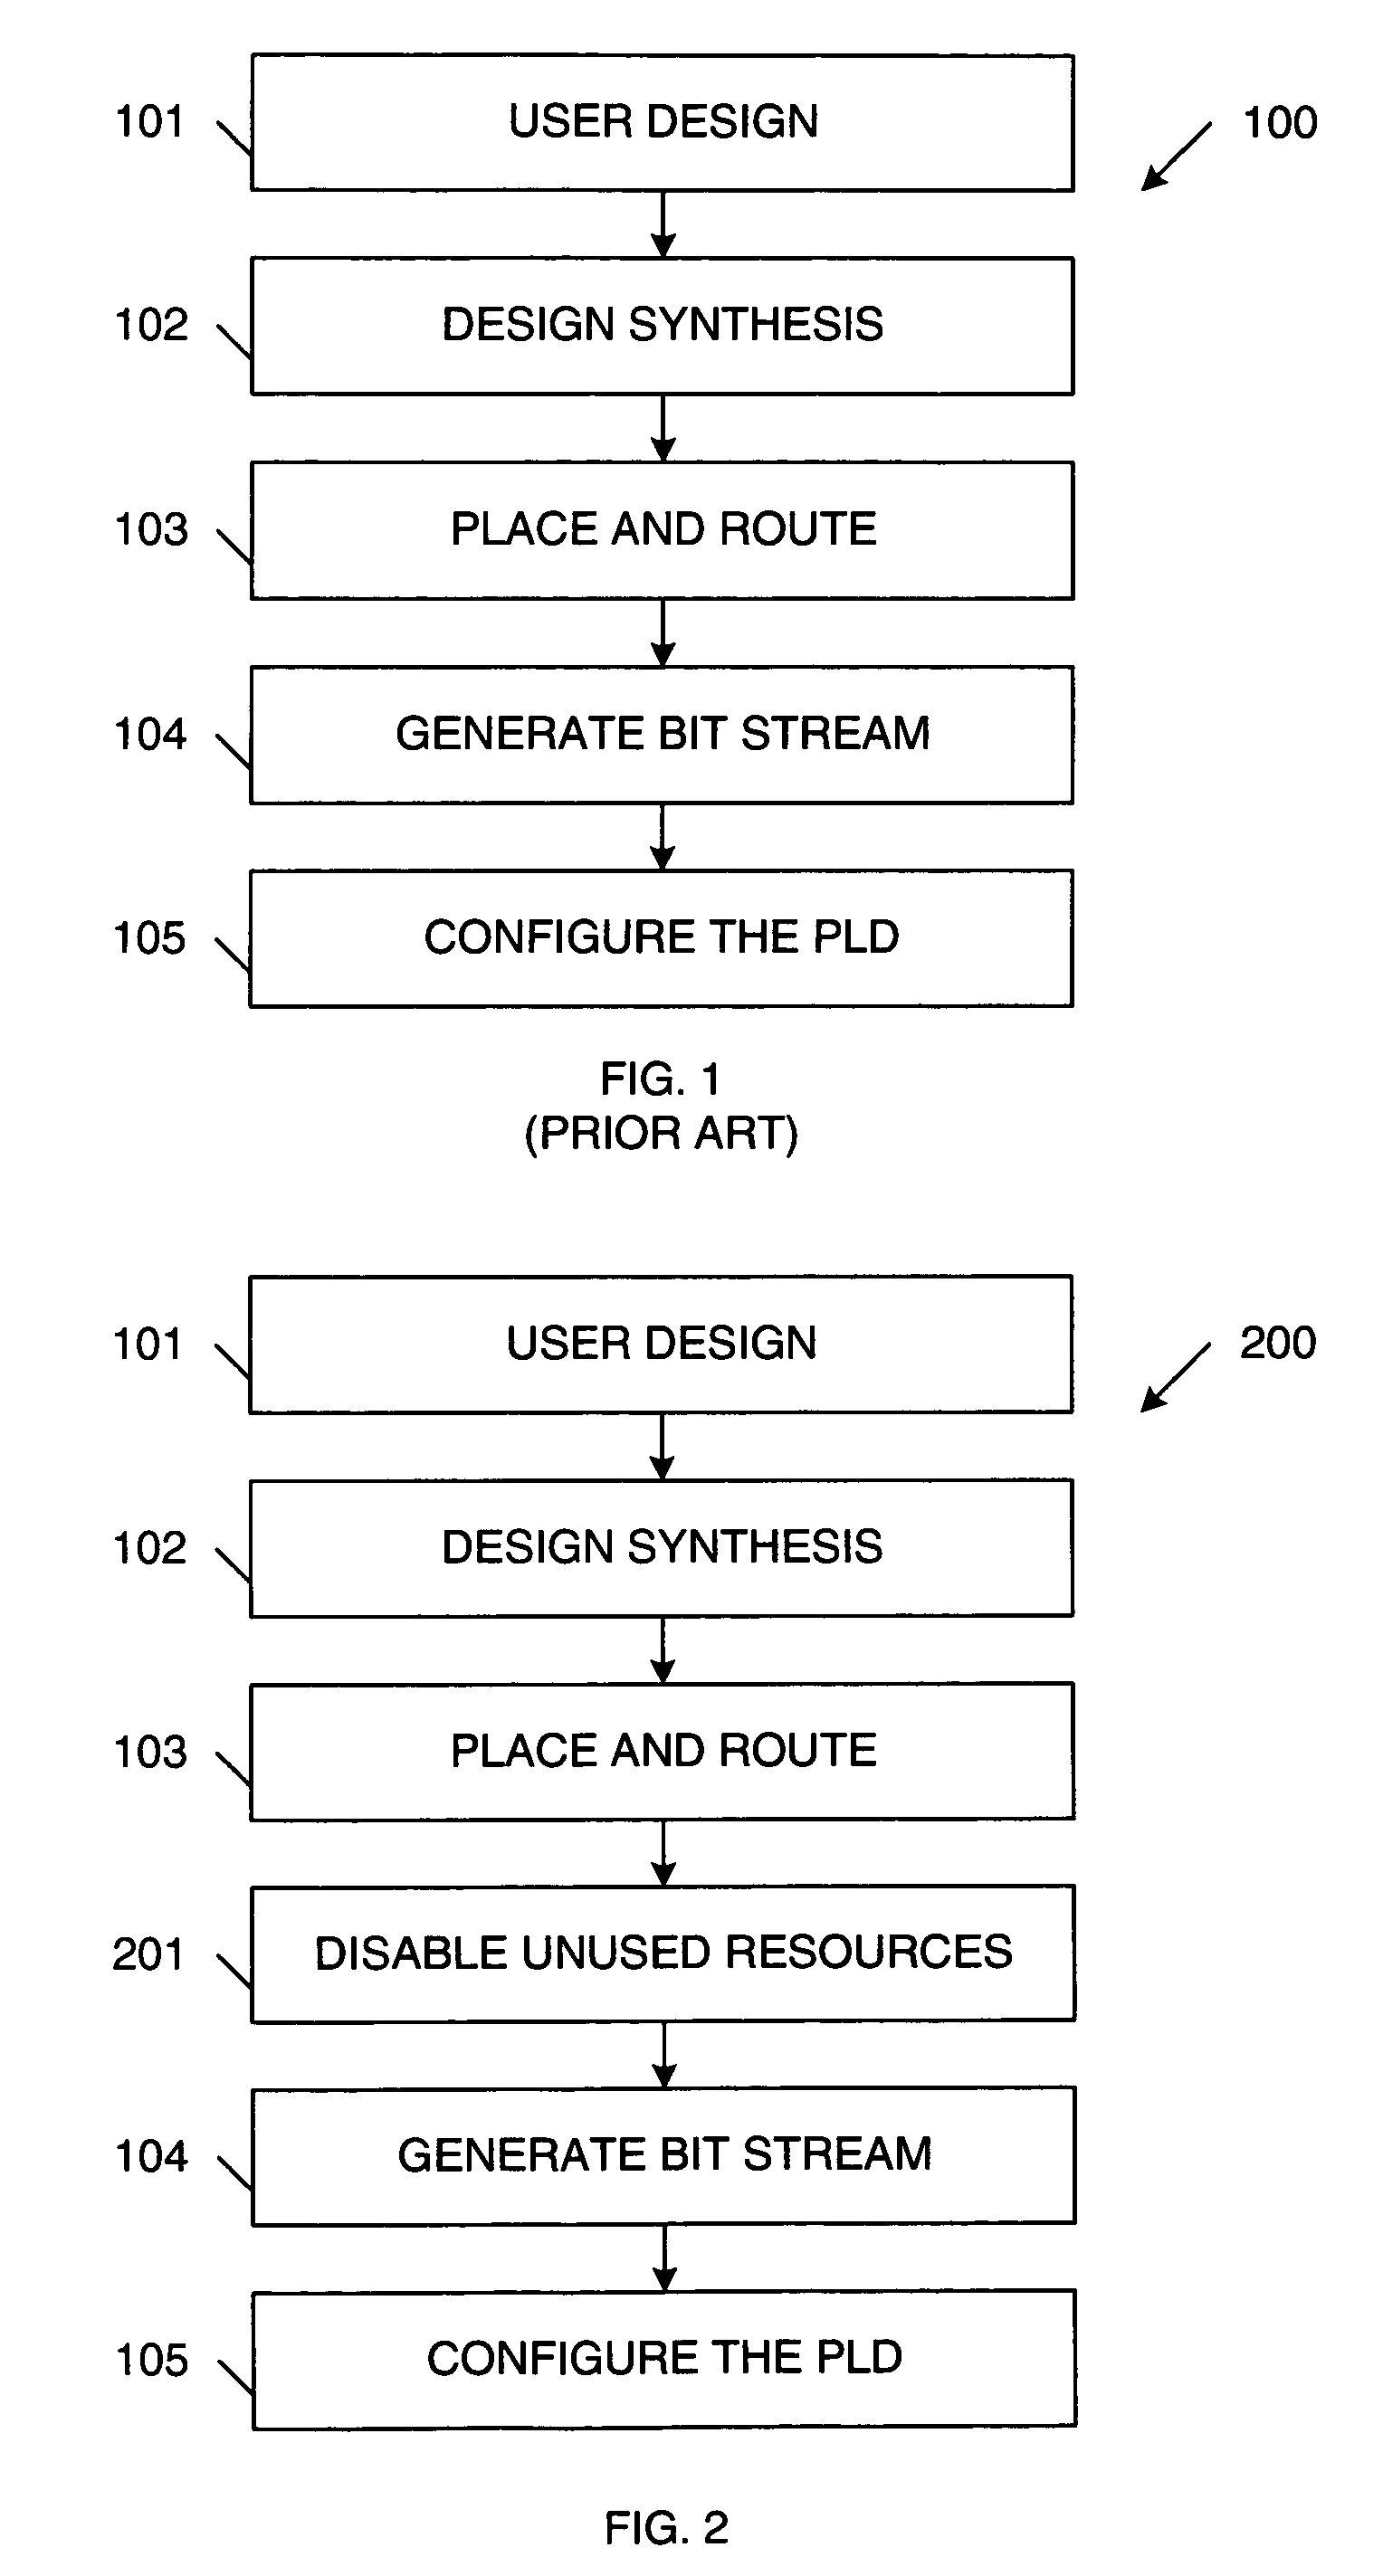 Tuning programmable logic devices for low-power design implementation